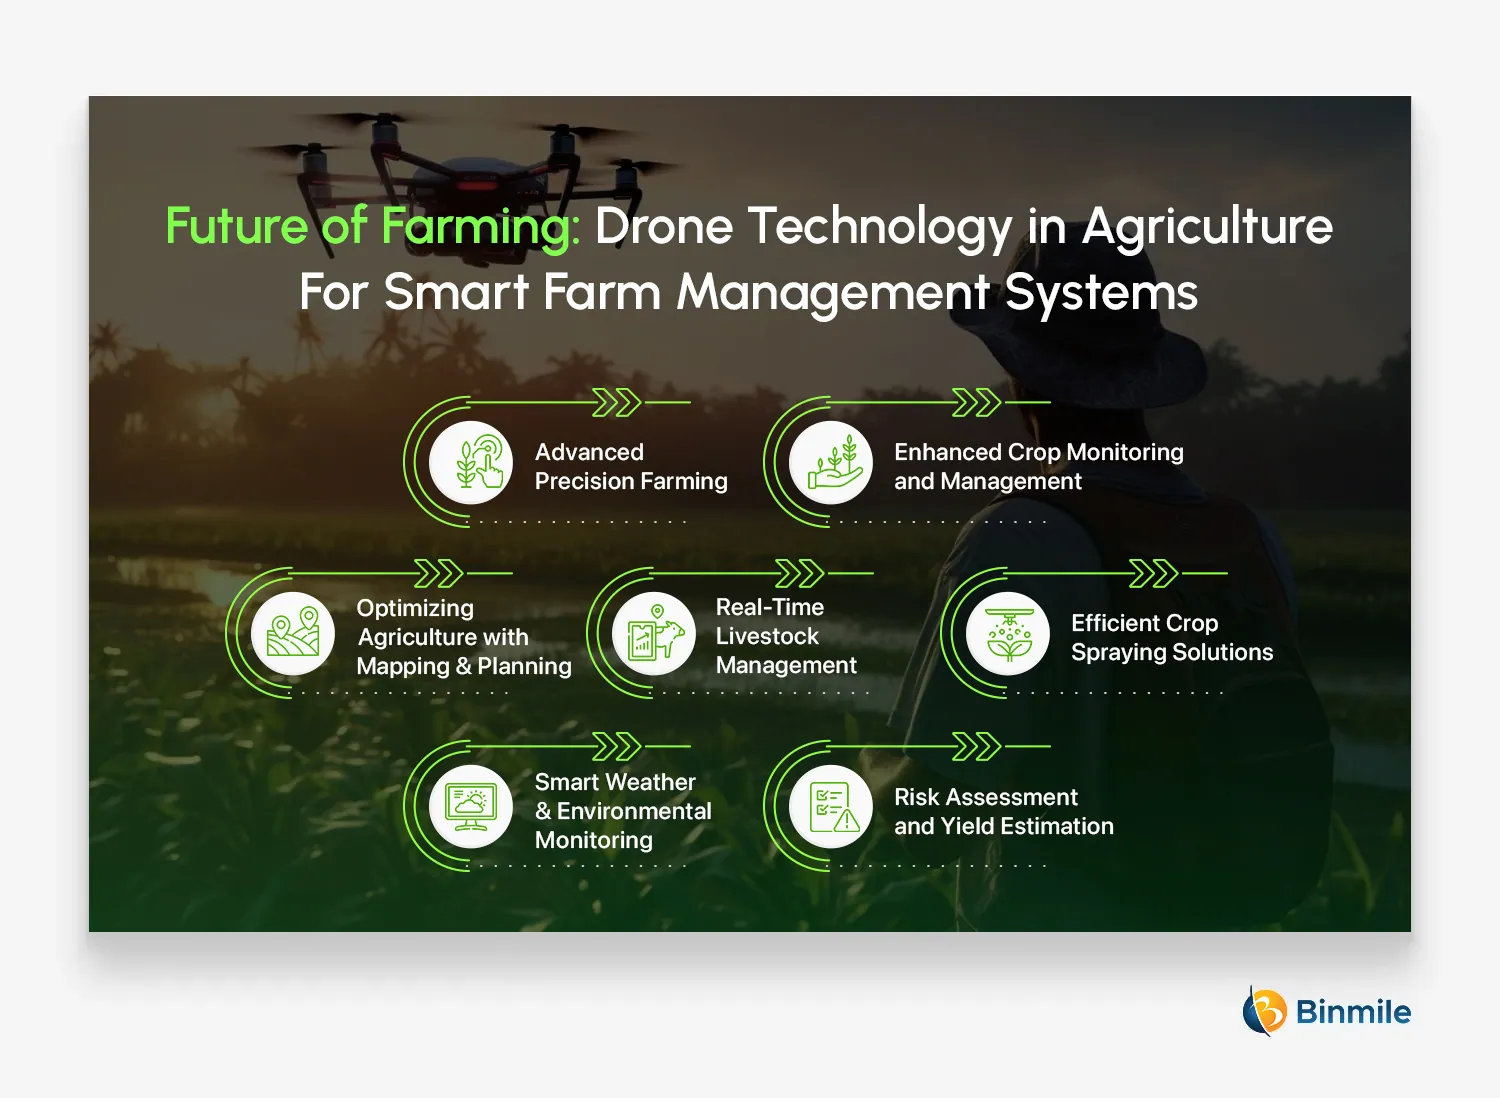 Drone Technology in Agriculture For Smart Farm Management Systems | Binmile